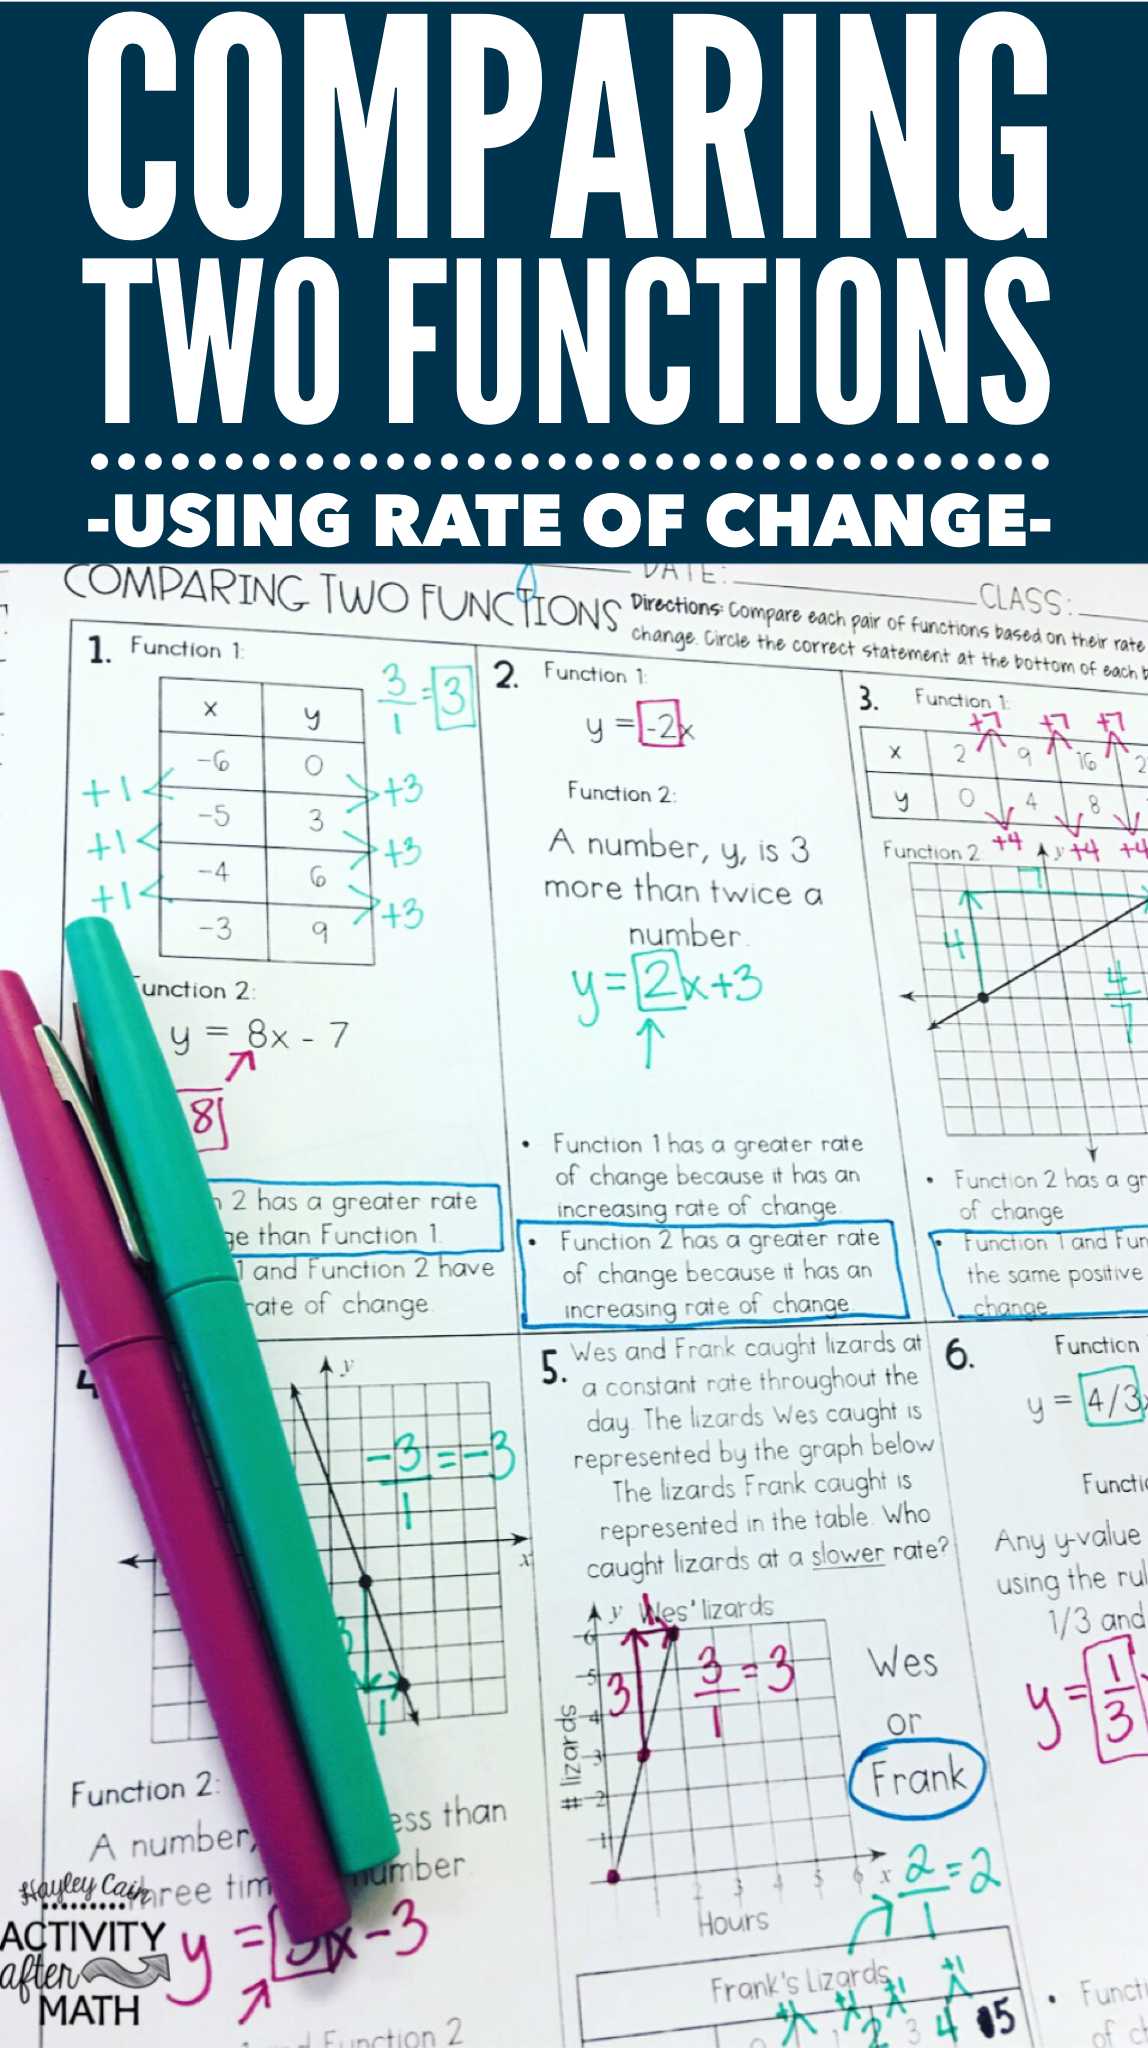 Square Root Equations Worksheet Also Paring Two Functions by Rate Of Change Practice Worksheet